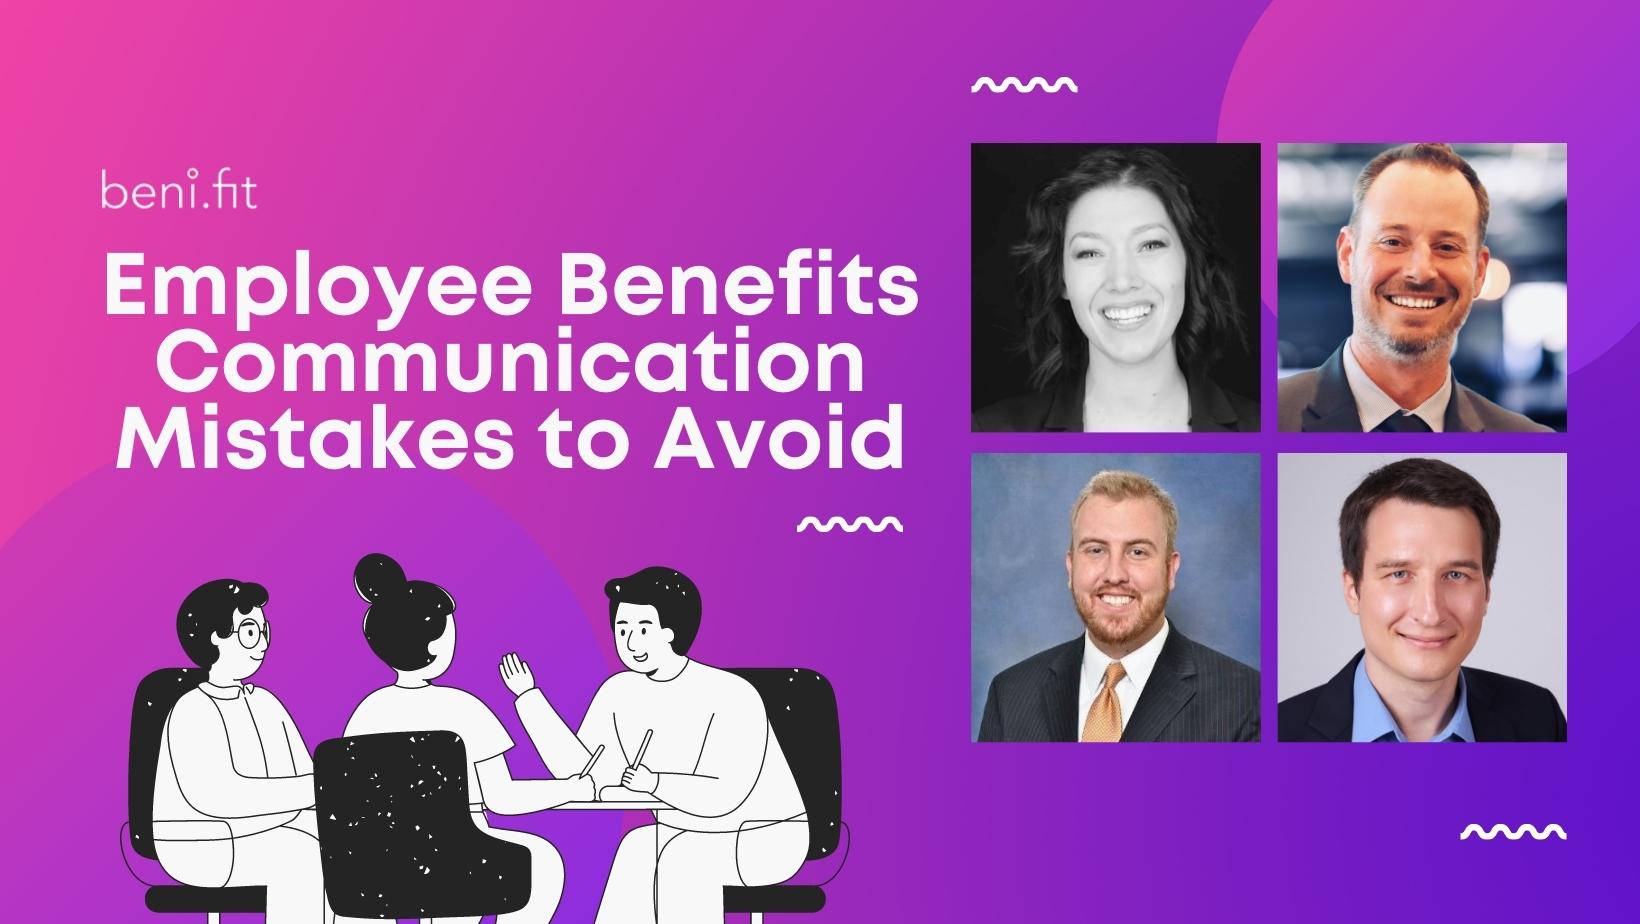 Employee Benefits Communication Mistakes to Avoid